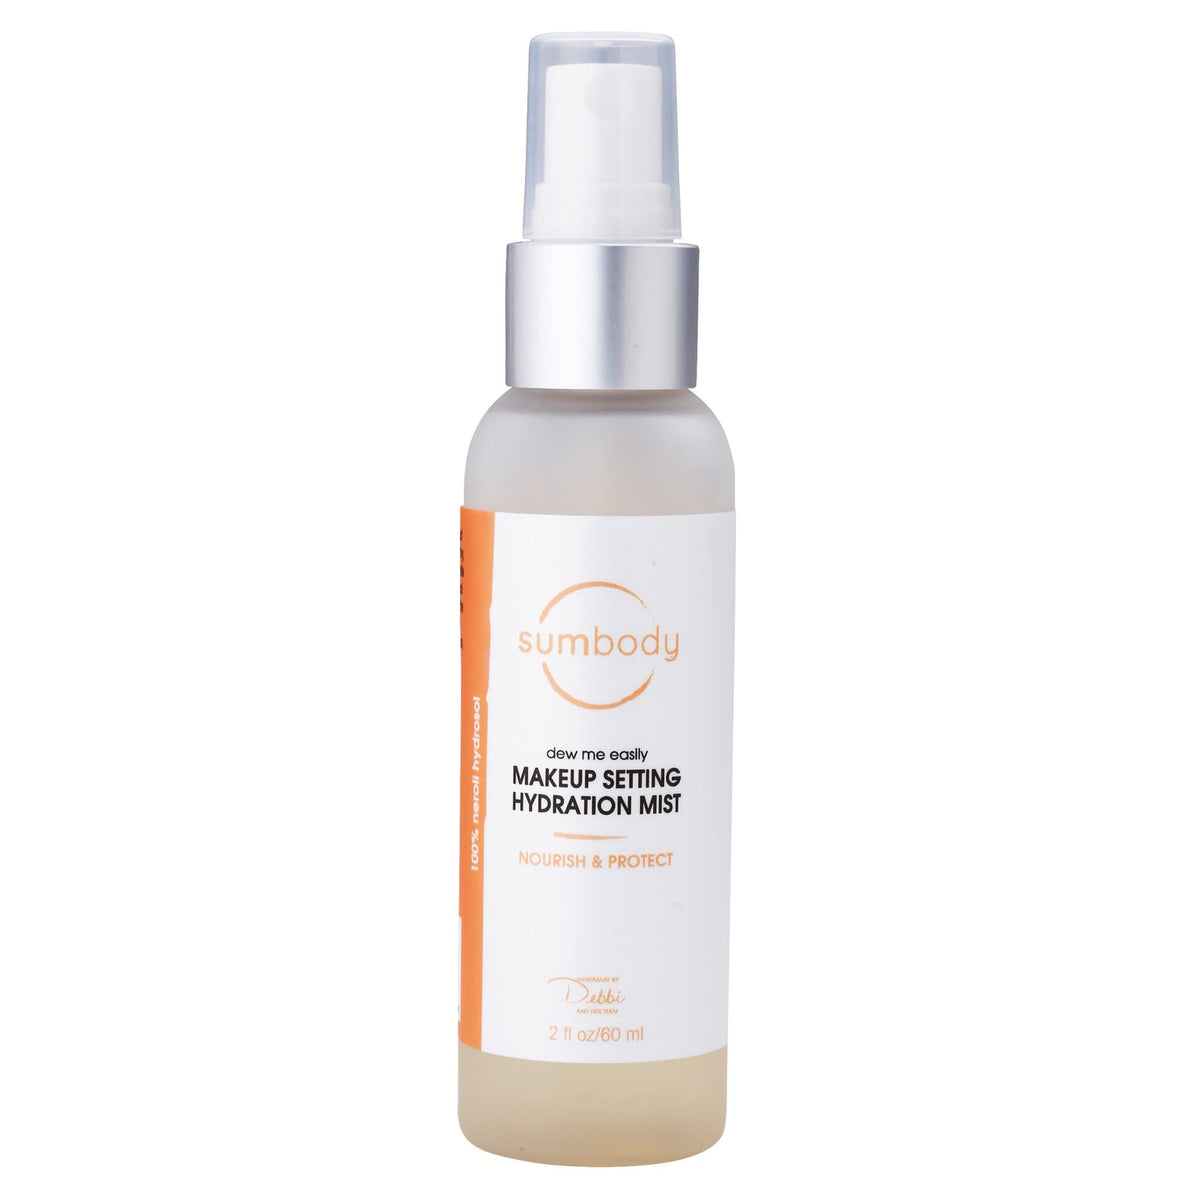 Dew Me Easily Makeup Setting Hydration Mist by Sumbody Skincare